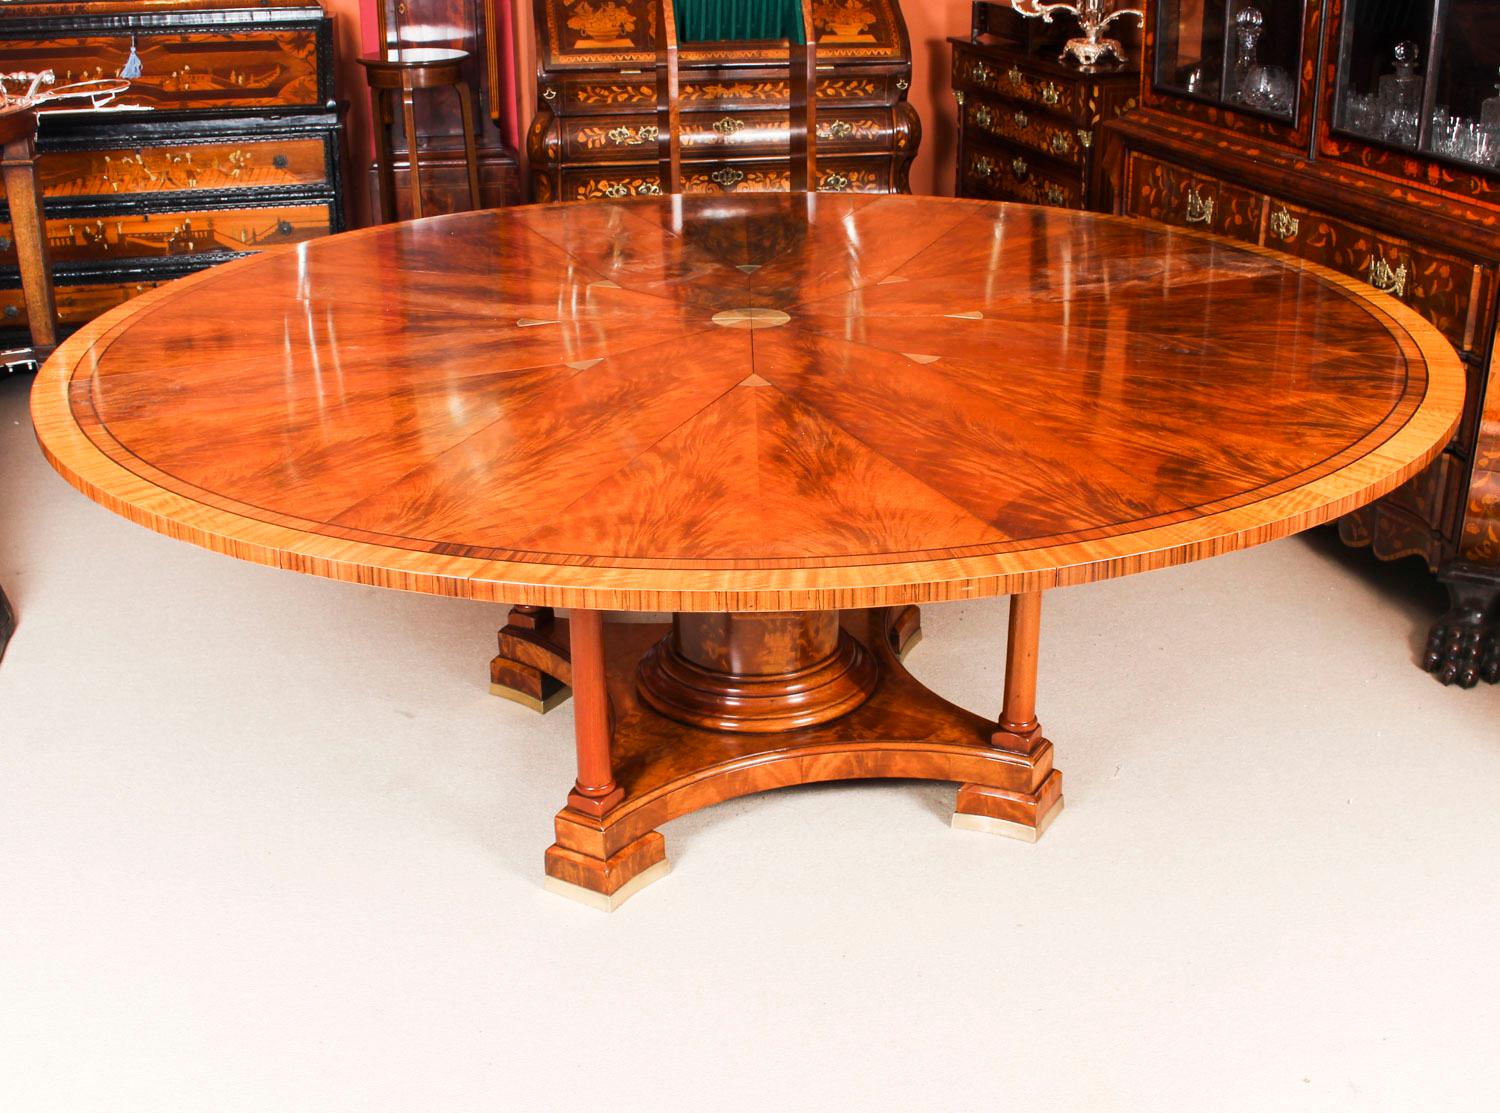 This is a beautiful dining set comprising a flame mahogany expanding dining table in the manner of Johnson, Jupe & Co, dating from the early 20th century, and a matching set of ten dining chairs. Measure: 7ft diameter.

The hexadecagon round top